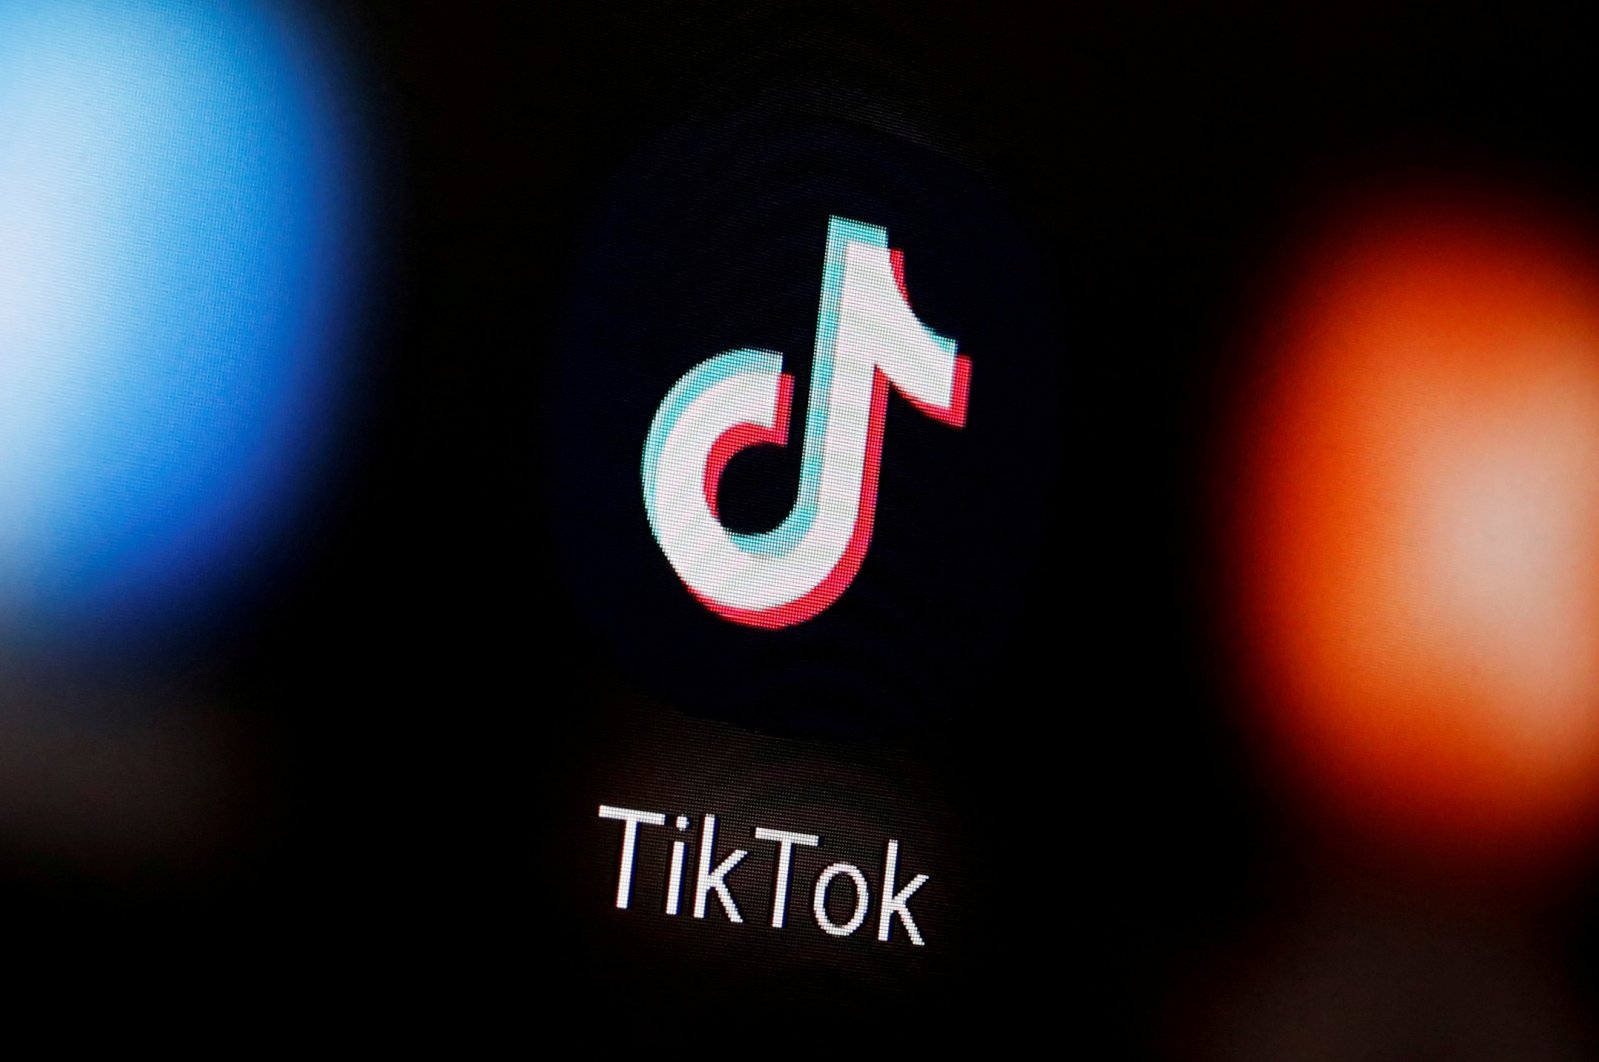 A TikTok logo is displayed on a smartphone in this illustration taken January 6, 2020. (Reuters Photo)